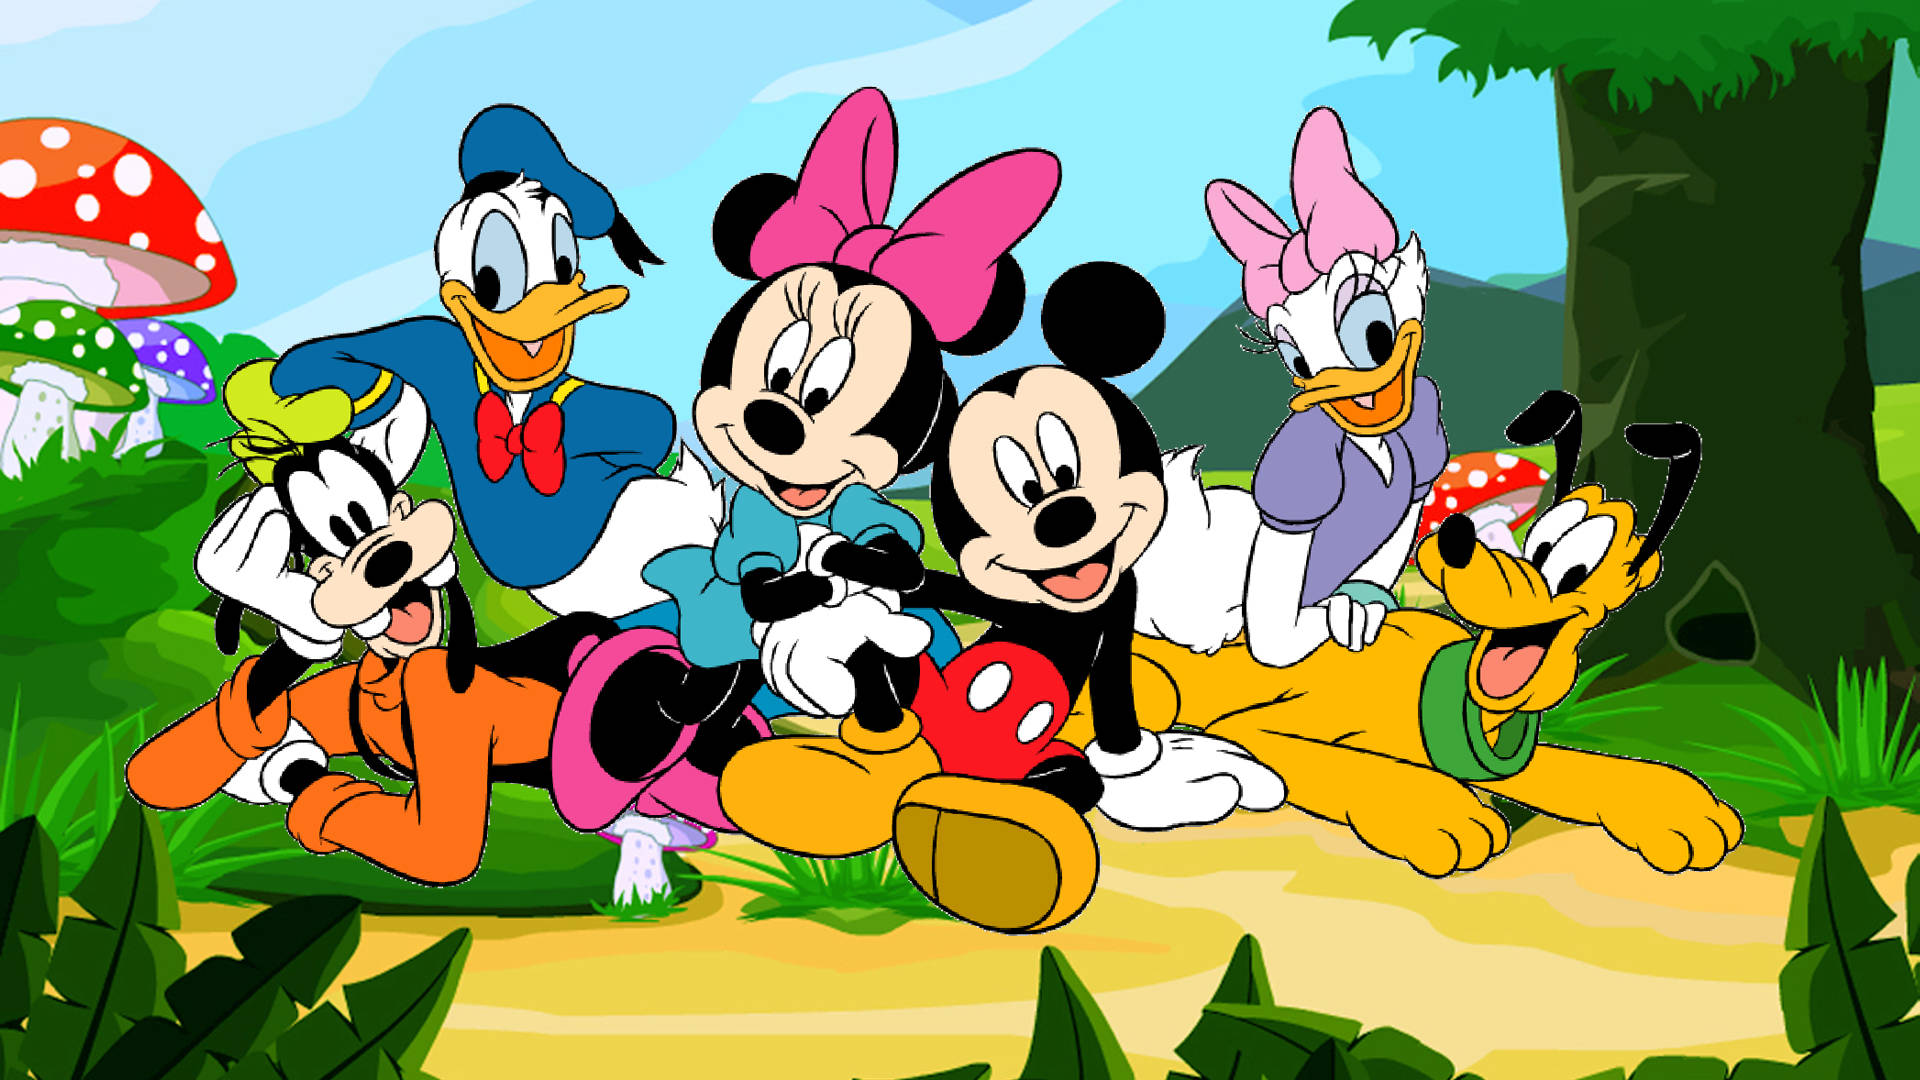 Disney 1920x1080 Hd Mickey Mouse Cast In Forest Wallpaper